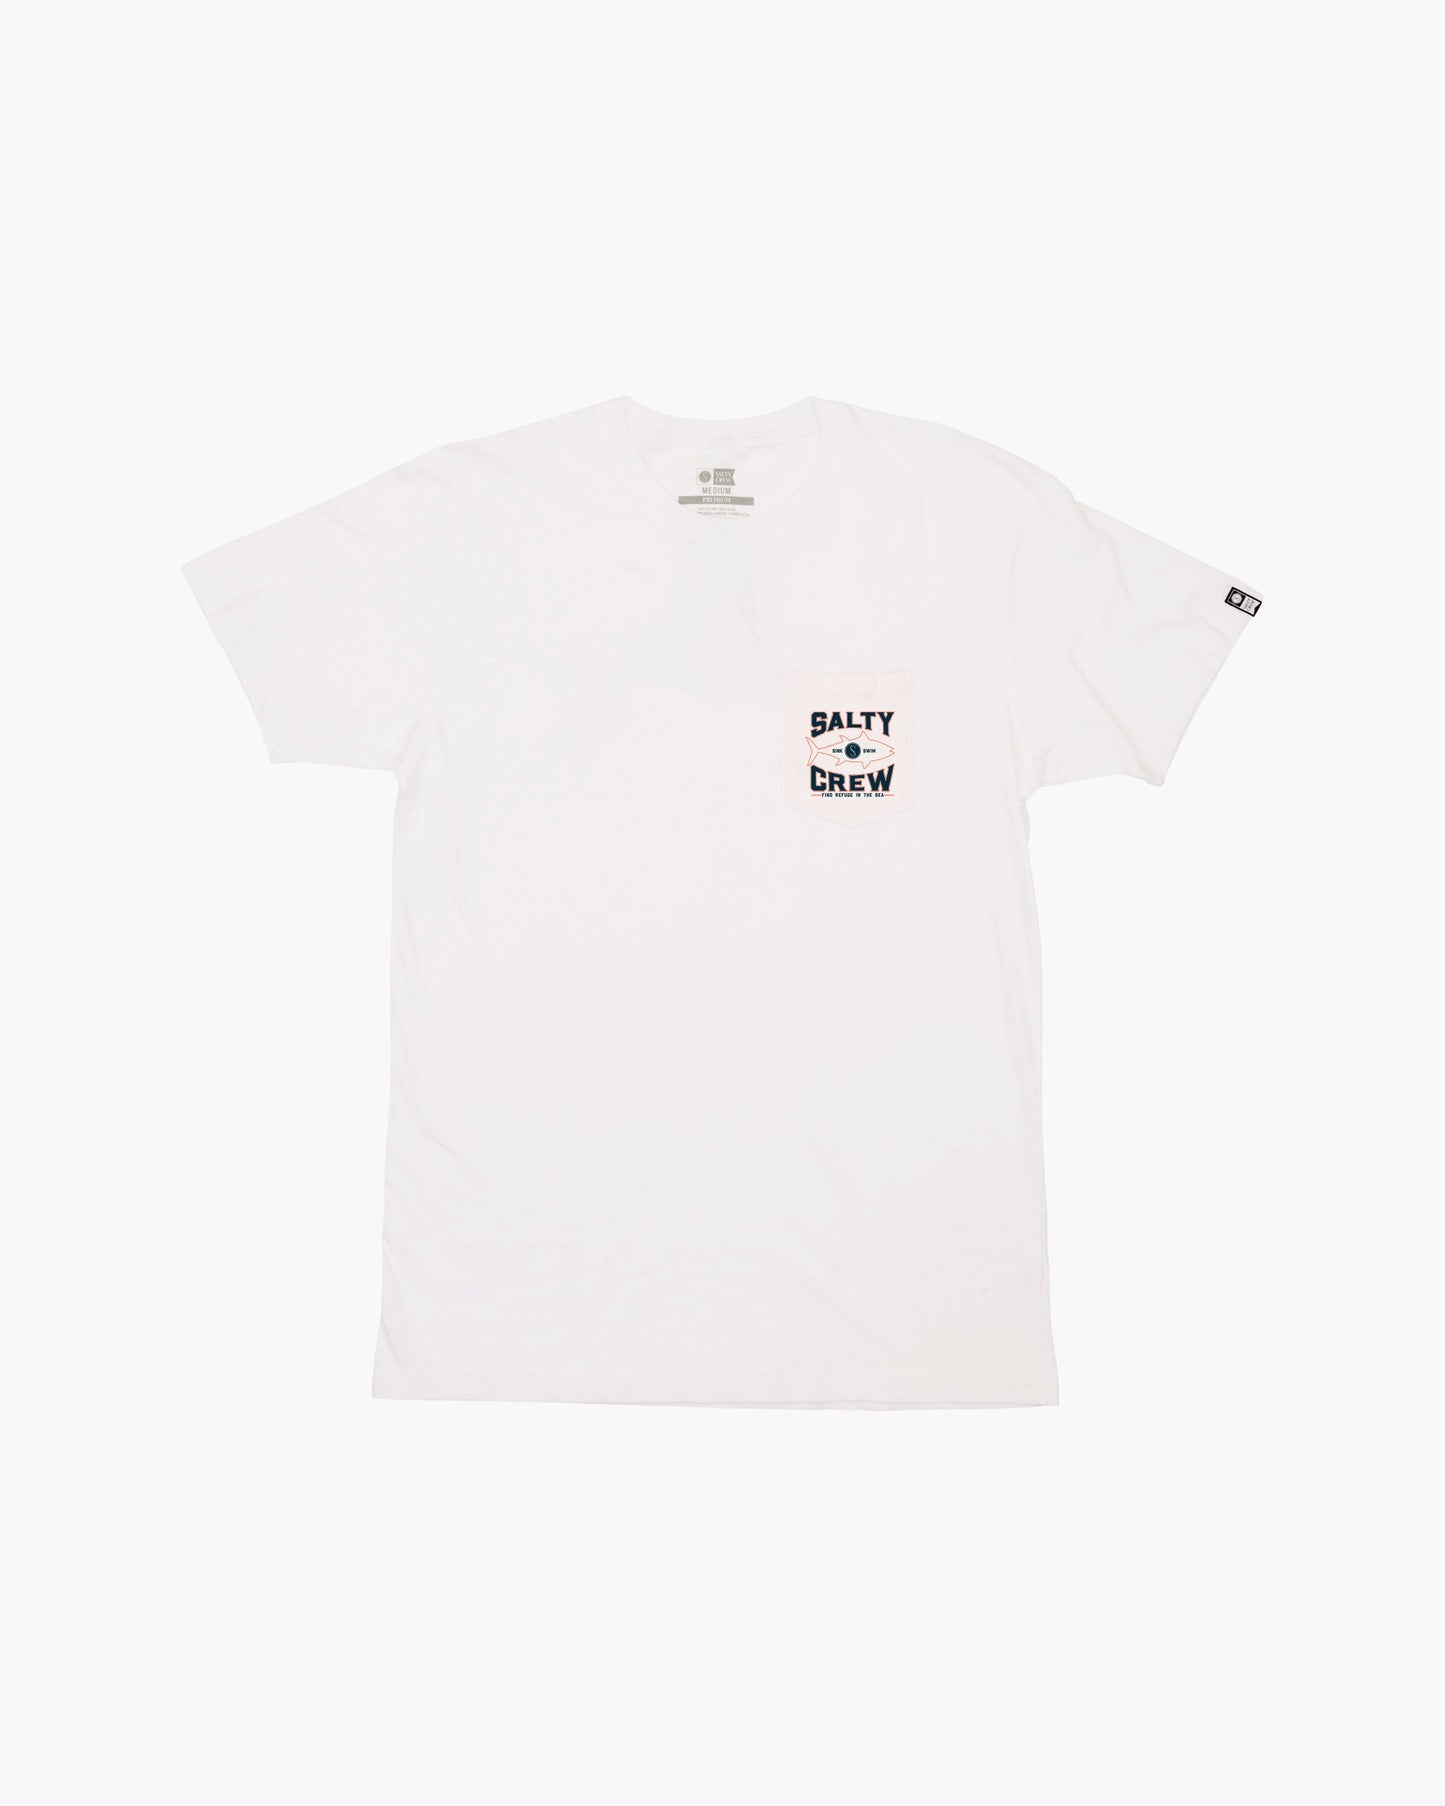 TIGHT LINES POCKET S/S TEE - White